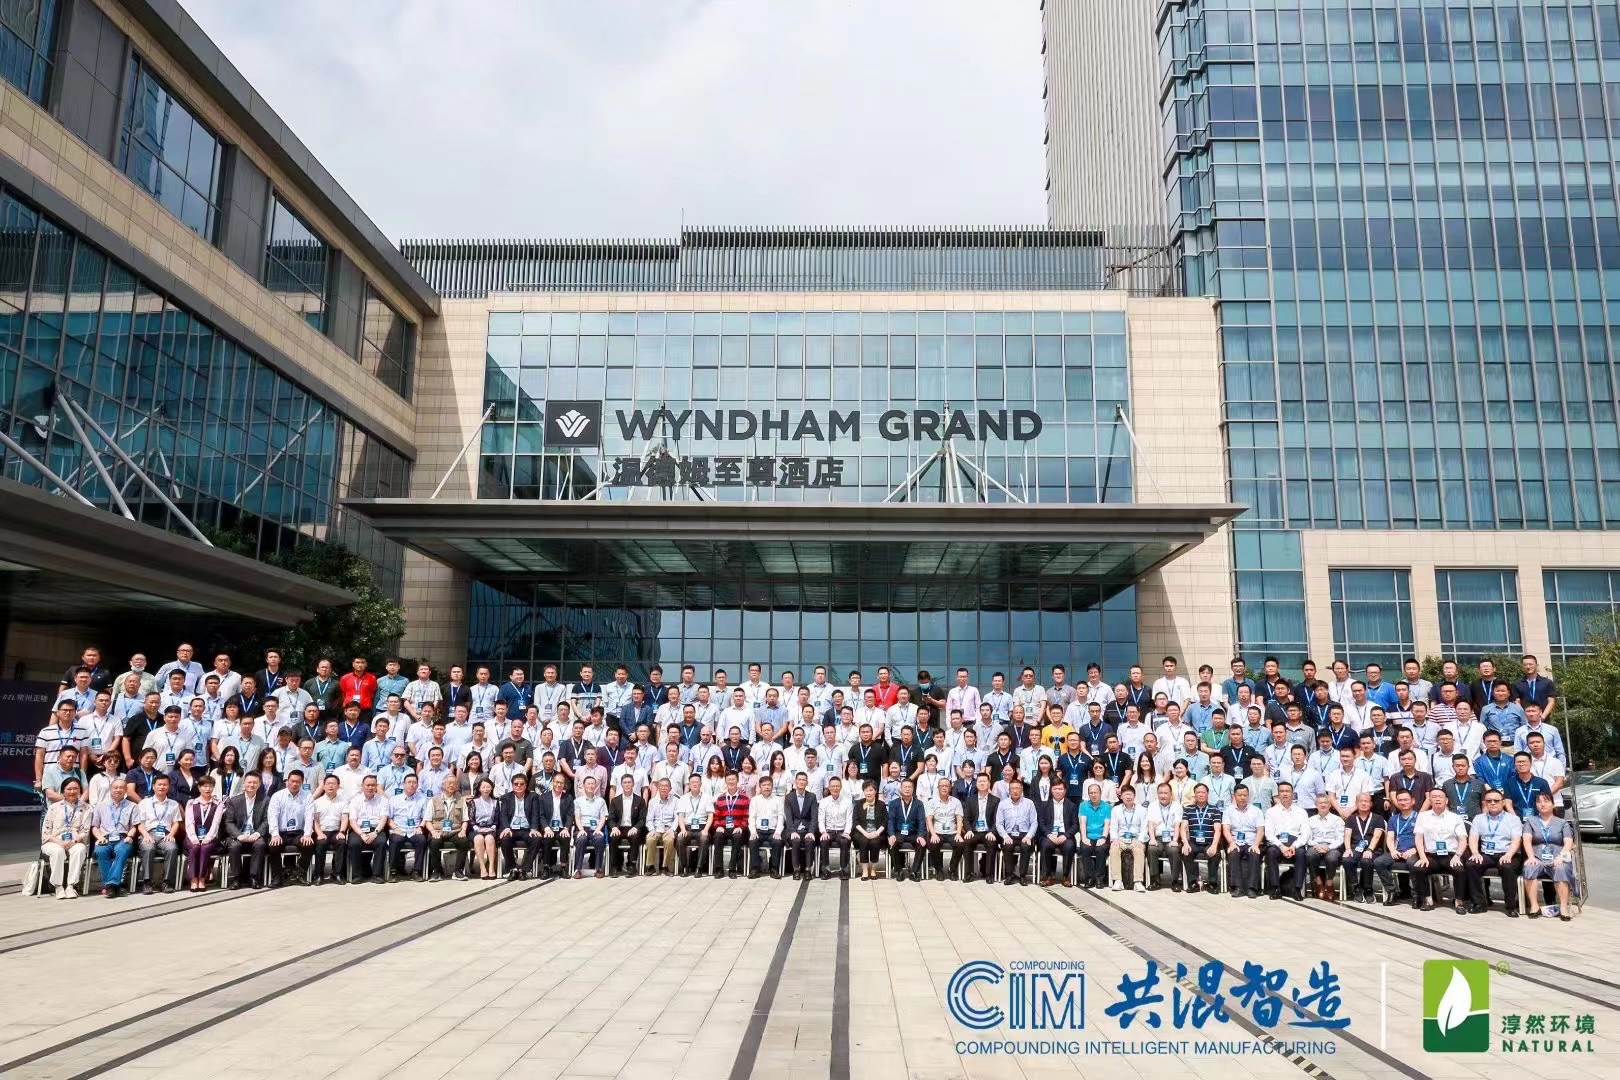 Congratulations to Nantong Dongli for its successful participation in CIM Blend Manufacturing Exhibition in September 2021